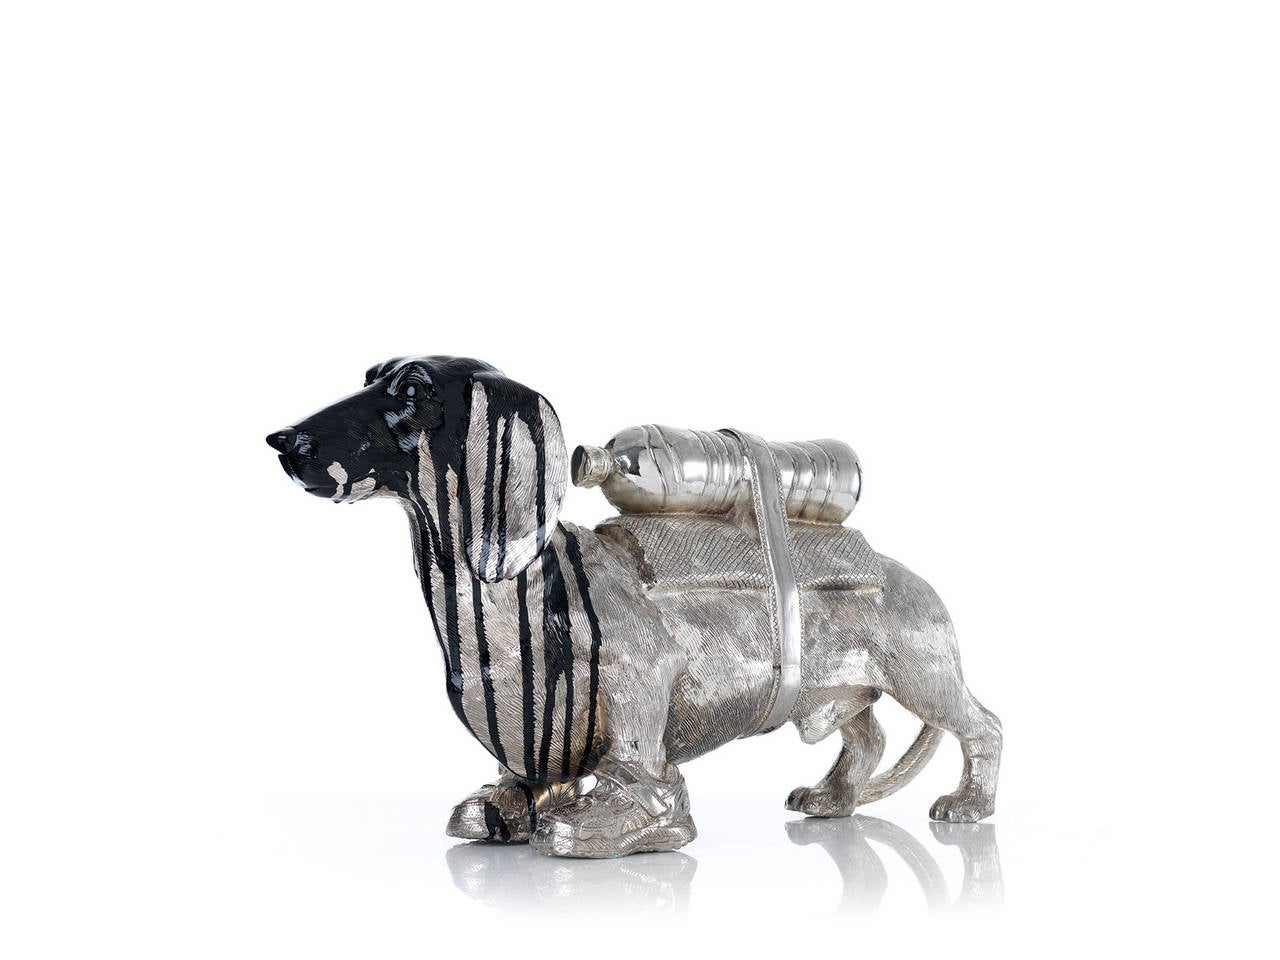 Cloned Dachshund with pet bottle. - Sculpture by William Sweetlove